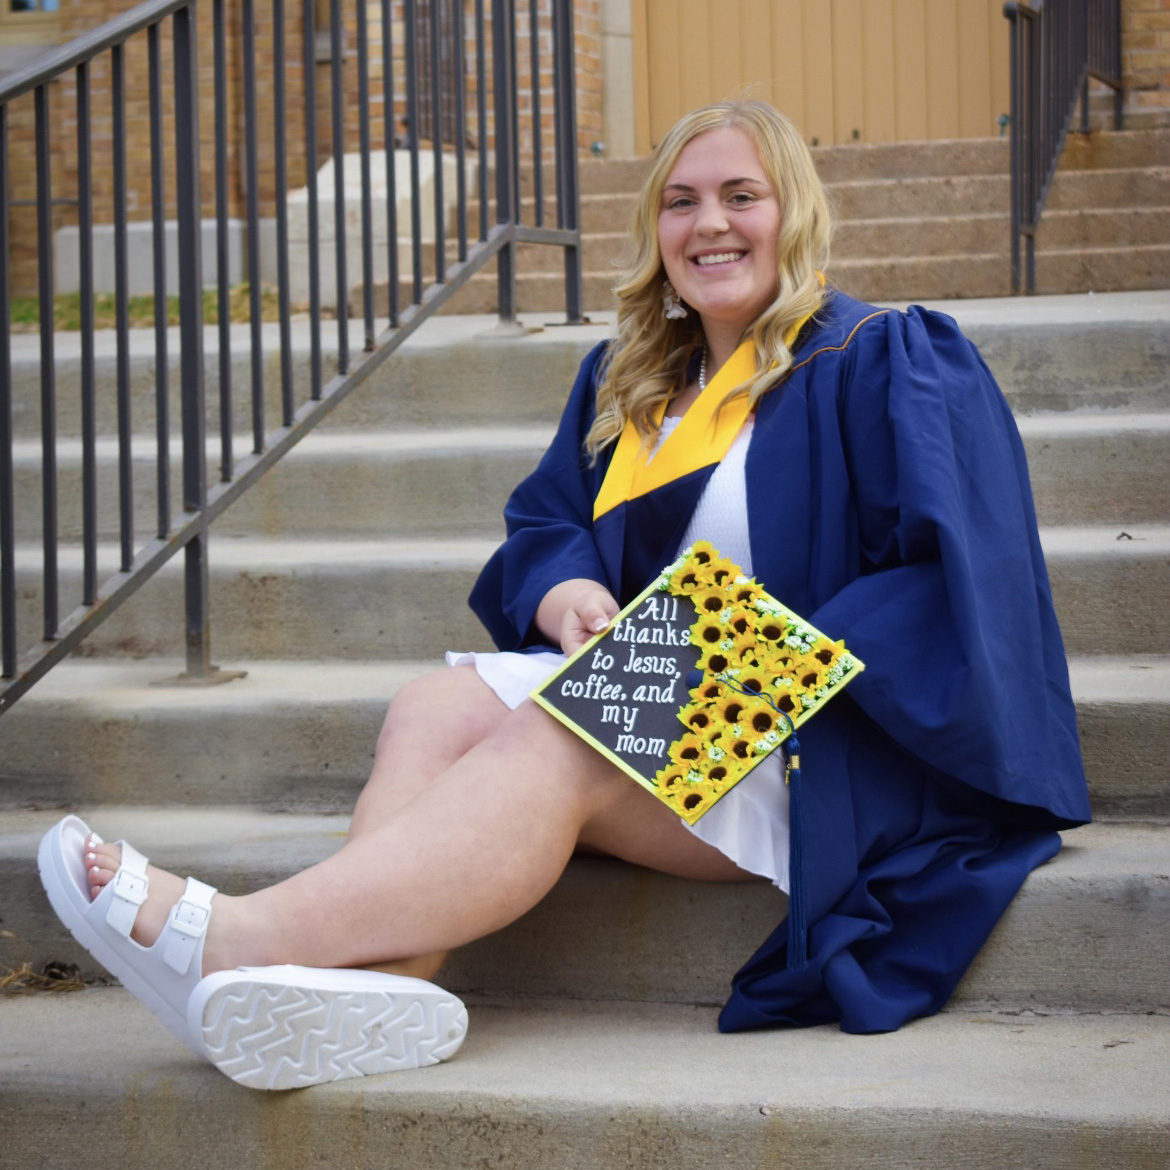 Class of 2024 Graduate, Karlee Hagan credits her success and ability to overcome challenges at UNC to her teachers, advisors and faith. Read more graduate stories here: unco.edu/news/articles/…. #UNCBears #Celebrate #GradStories